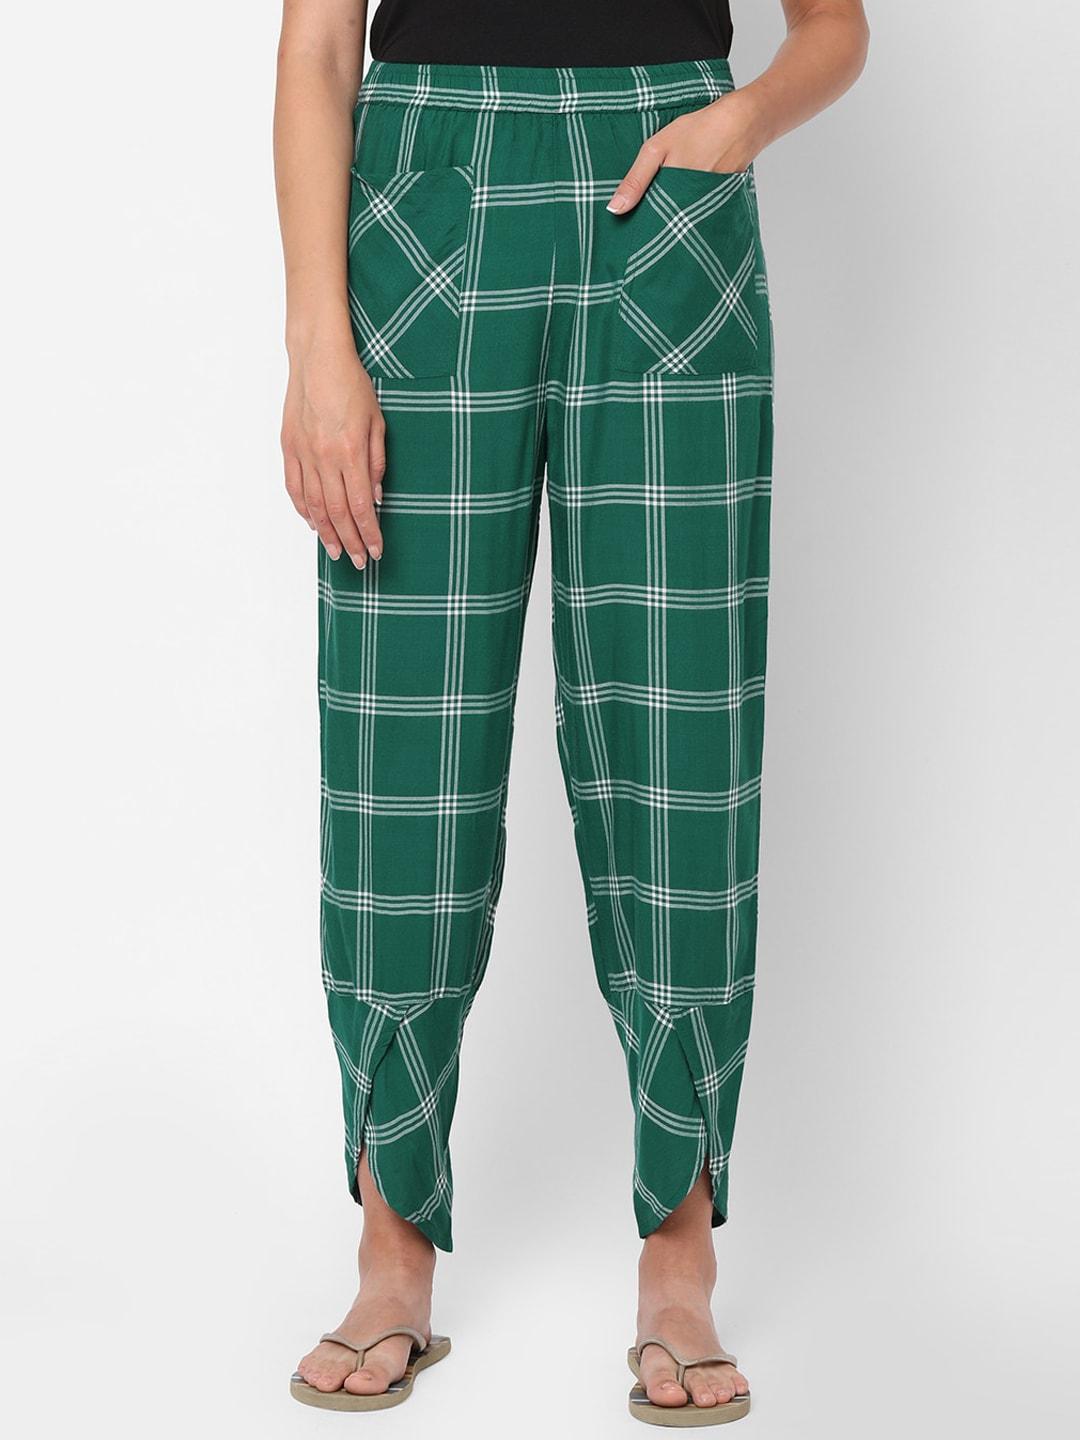 Mystere Paris Green Comfy Checked Lounge Pants